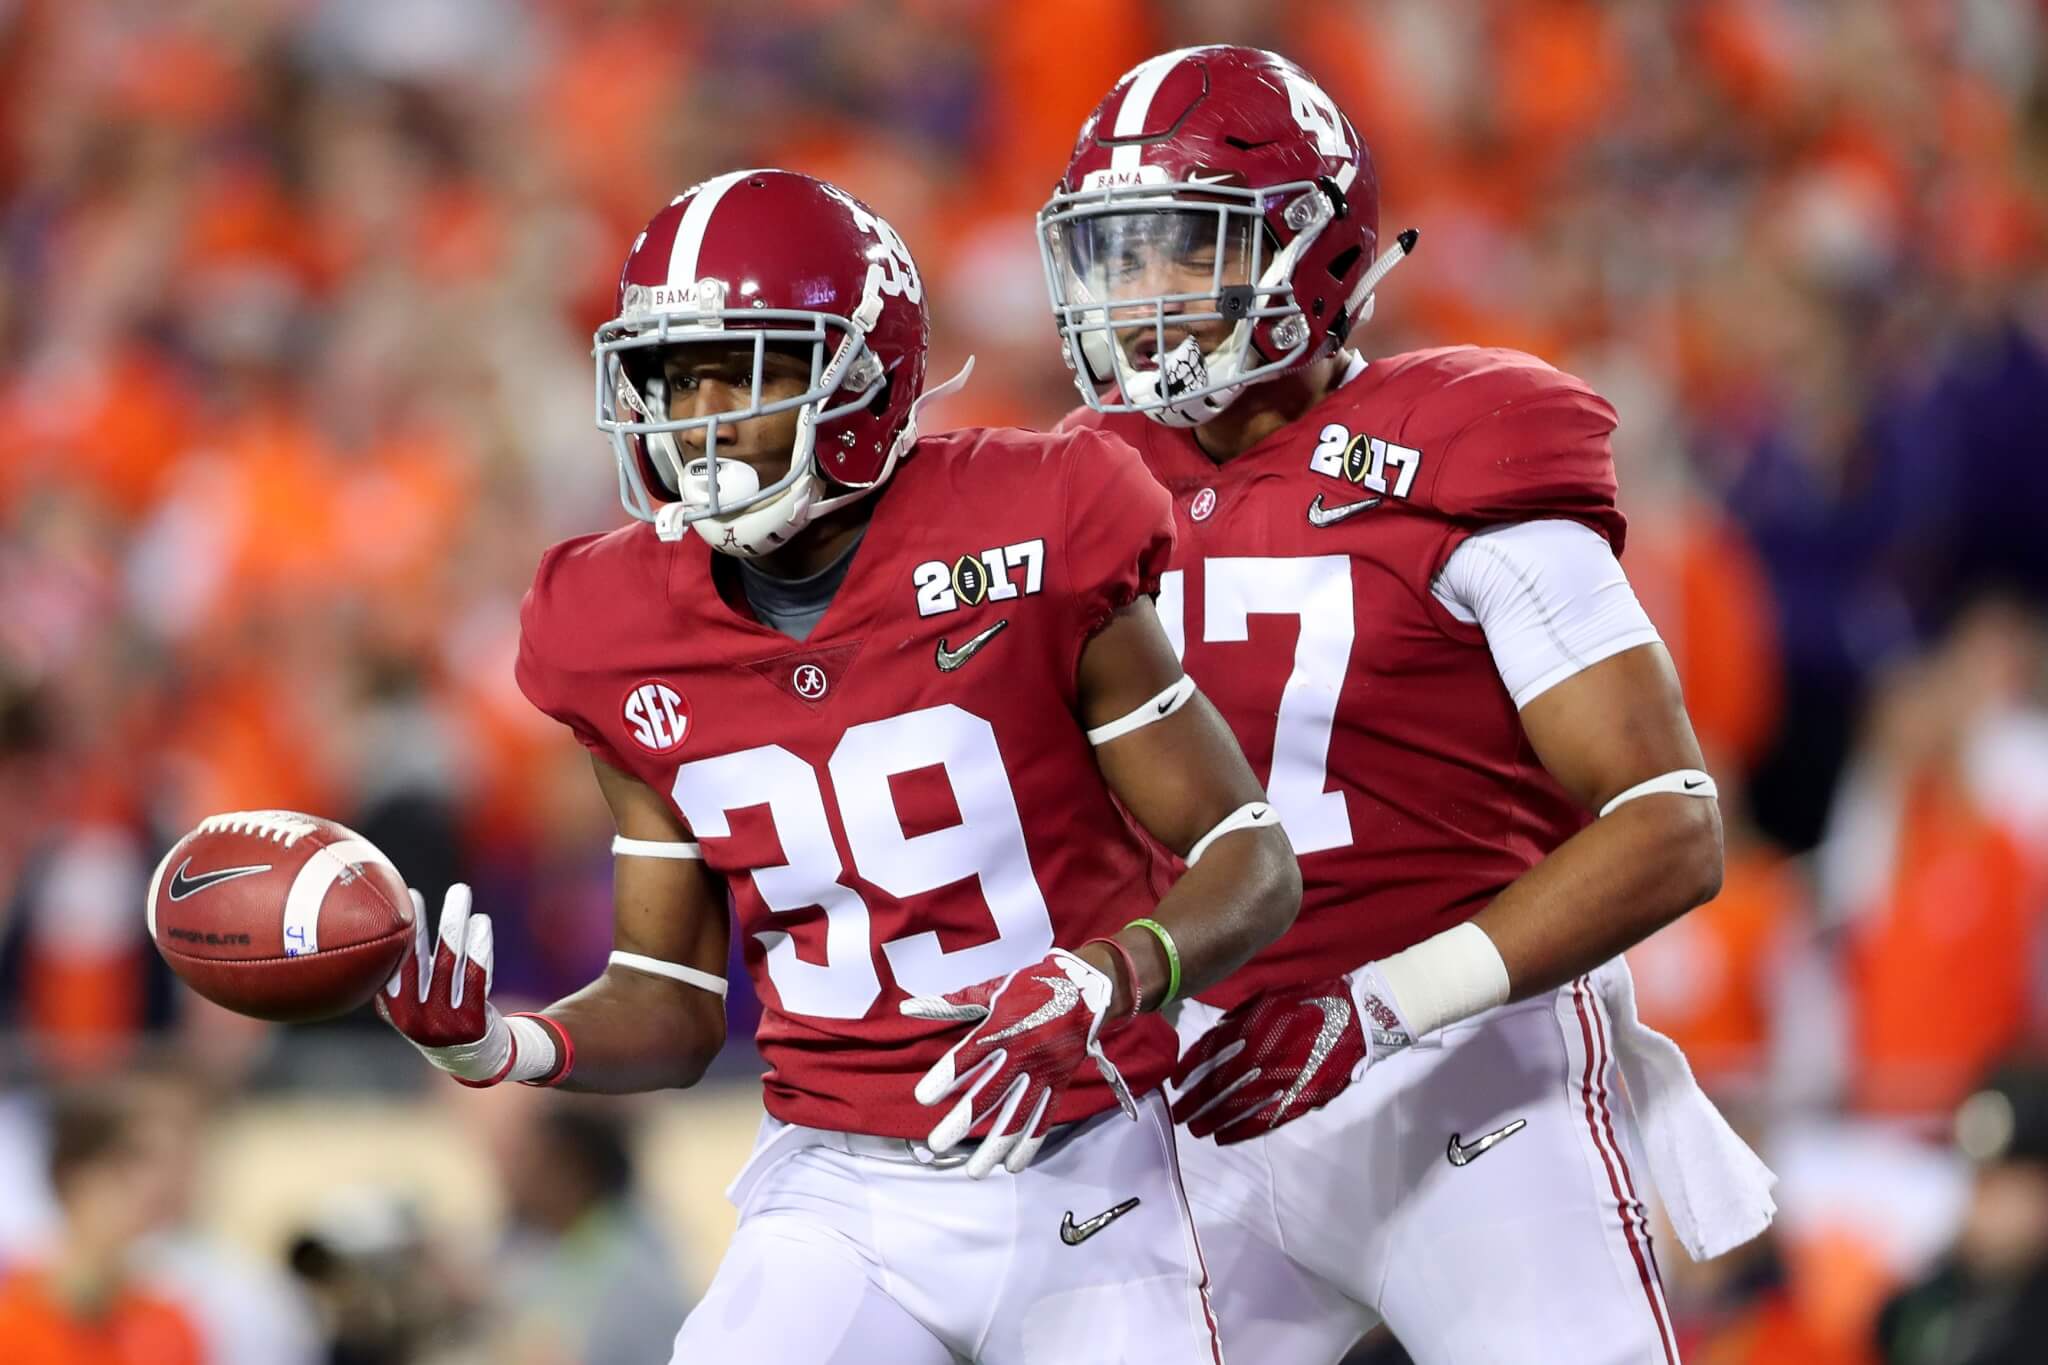 TAMPA, FL - JANUARY 09:  Defensive back Levi Wallace #39 and linebacker Christian Miller #47 of the Alabama Crimson Tide react during the first half against the Clemson Tigers in the 2017 College Football Playoff National Championship Game at Raymond James Stadium on January 9, 2017 in Tampa, Florida.  (Photo by Tom Pennington/Getty Images)